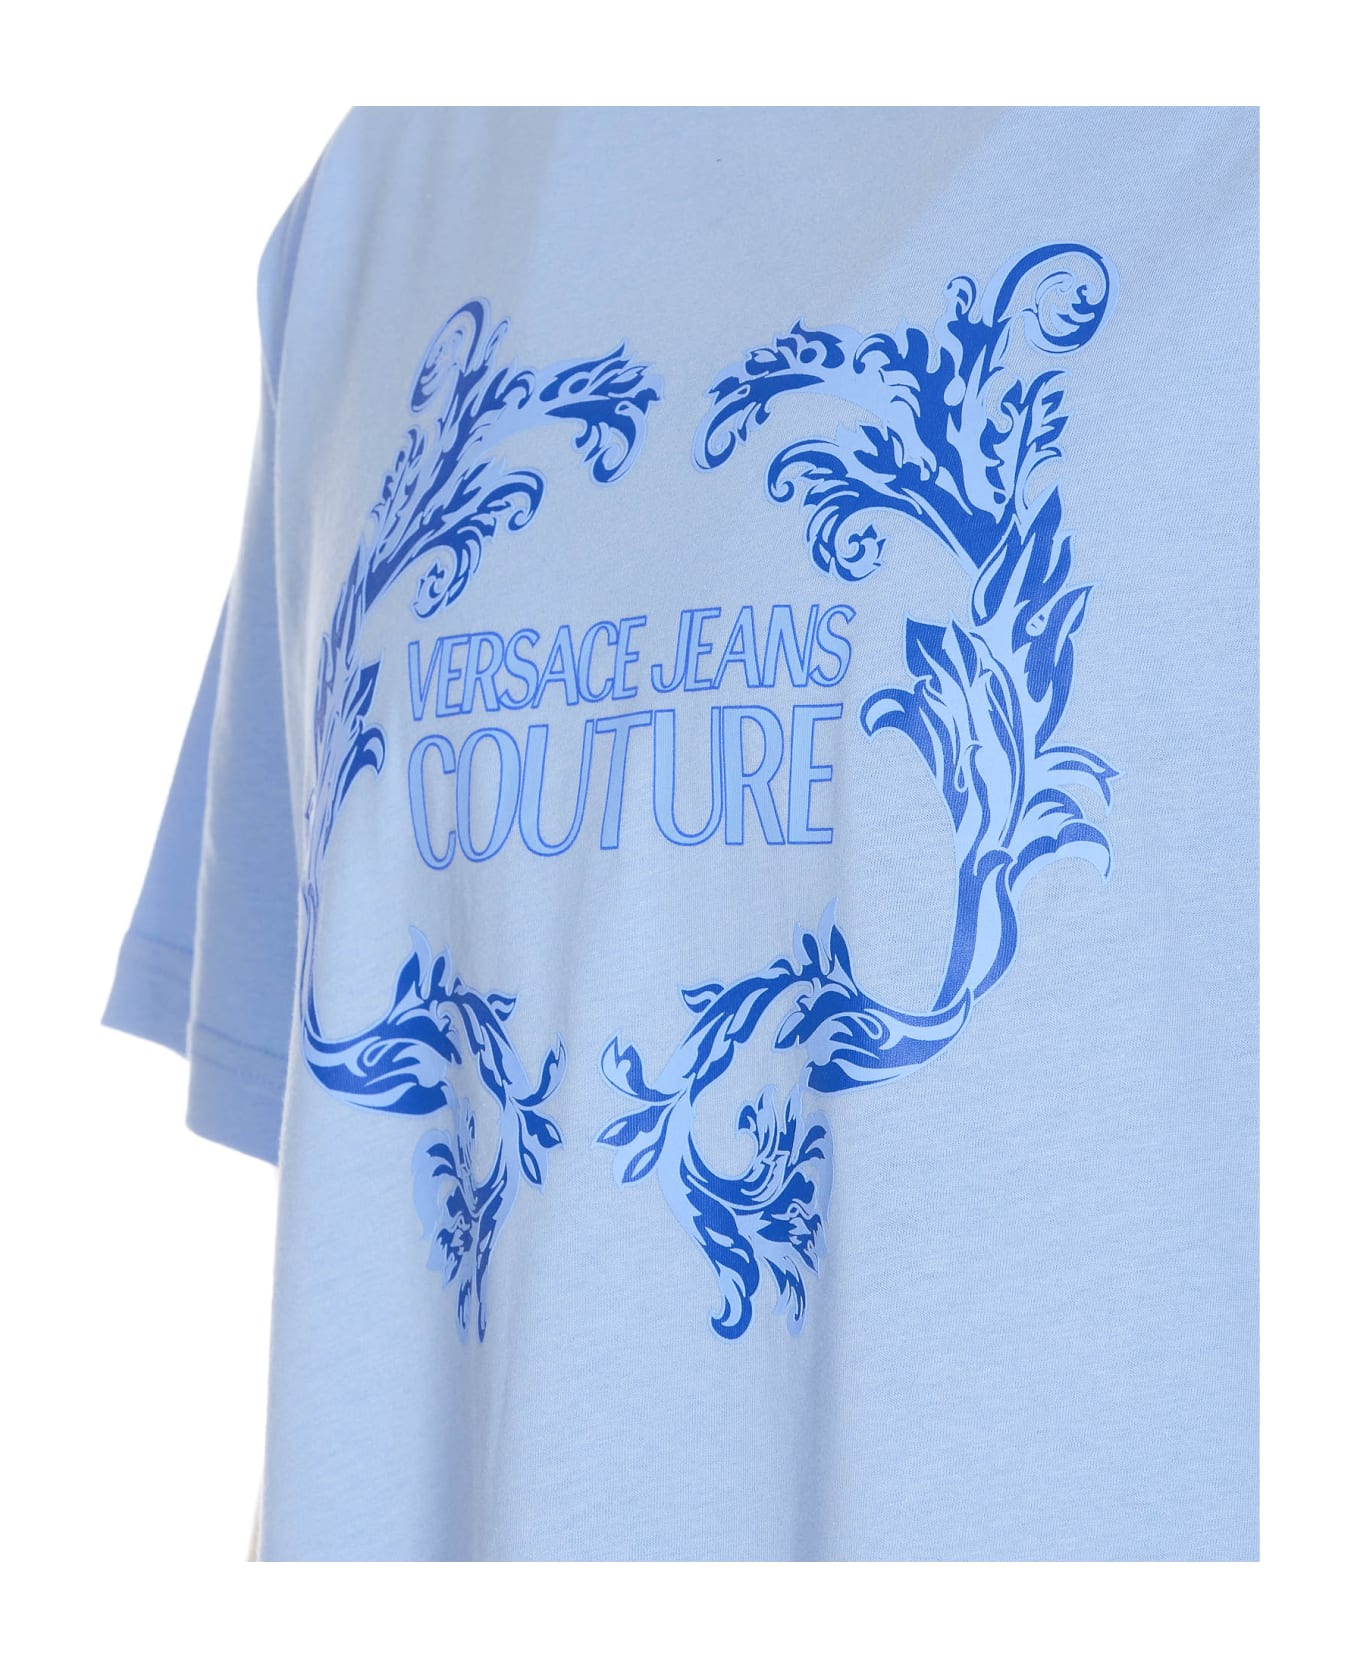 Versace Jeans Couture T-shirt - Blue シャツ